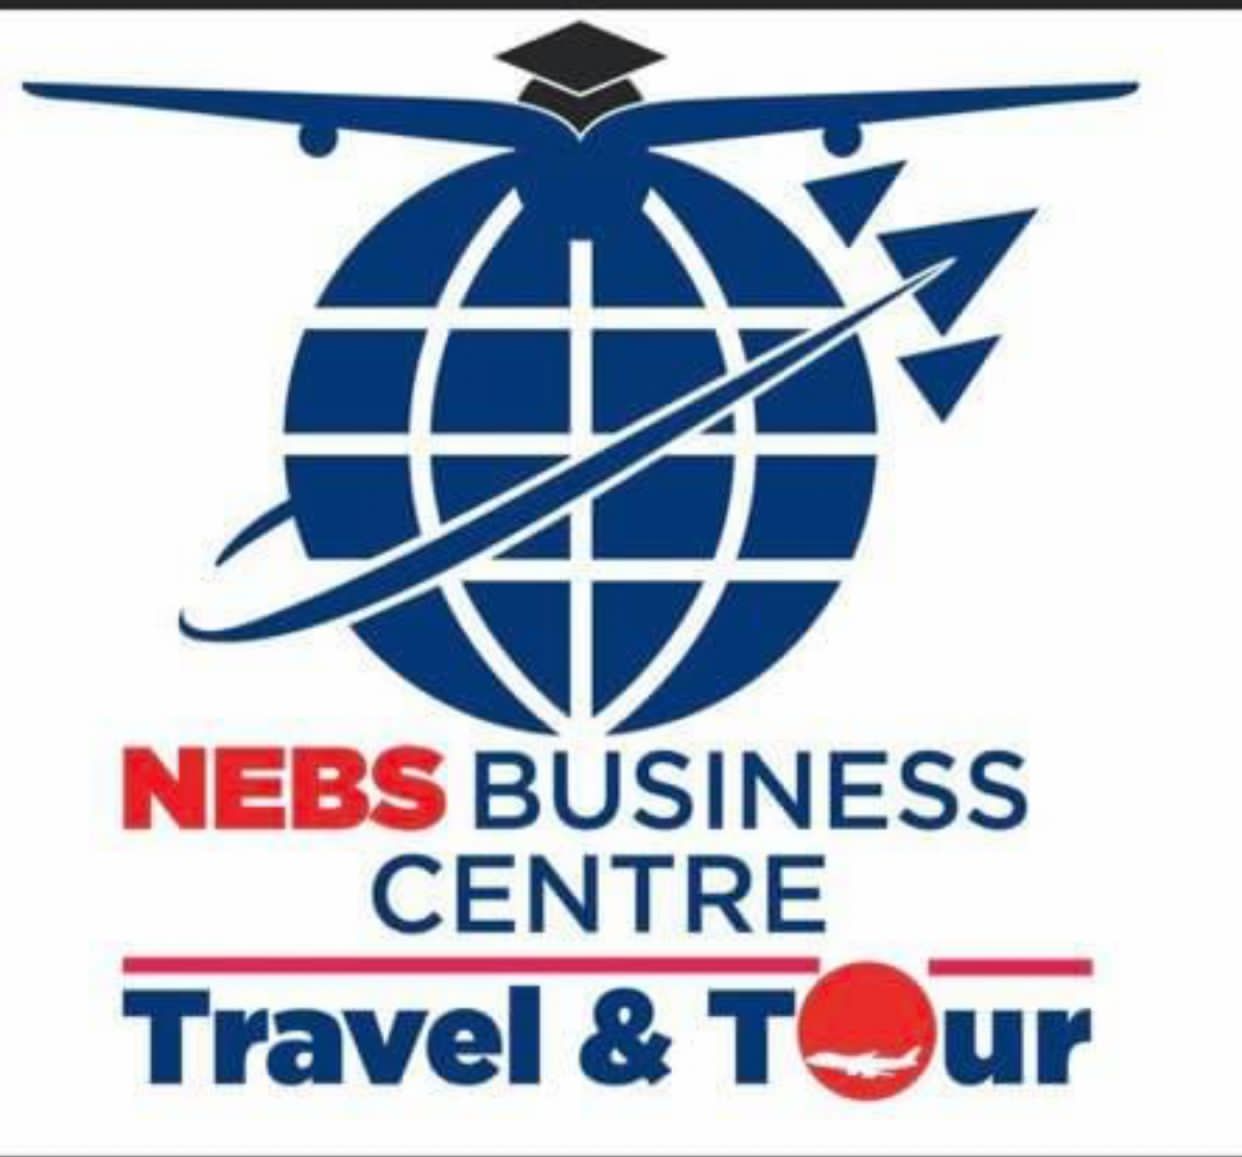 NEBS Educational and Travel Consult - Providing Quality Education and Travel Services in Ghana